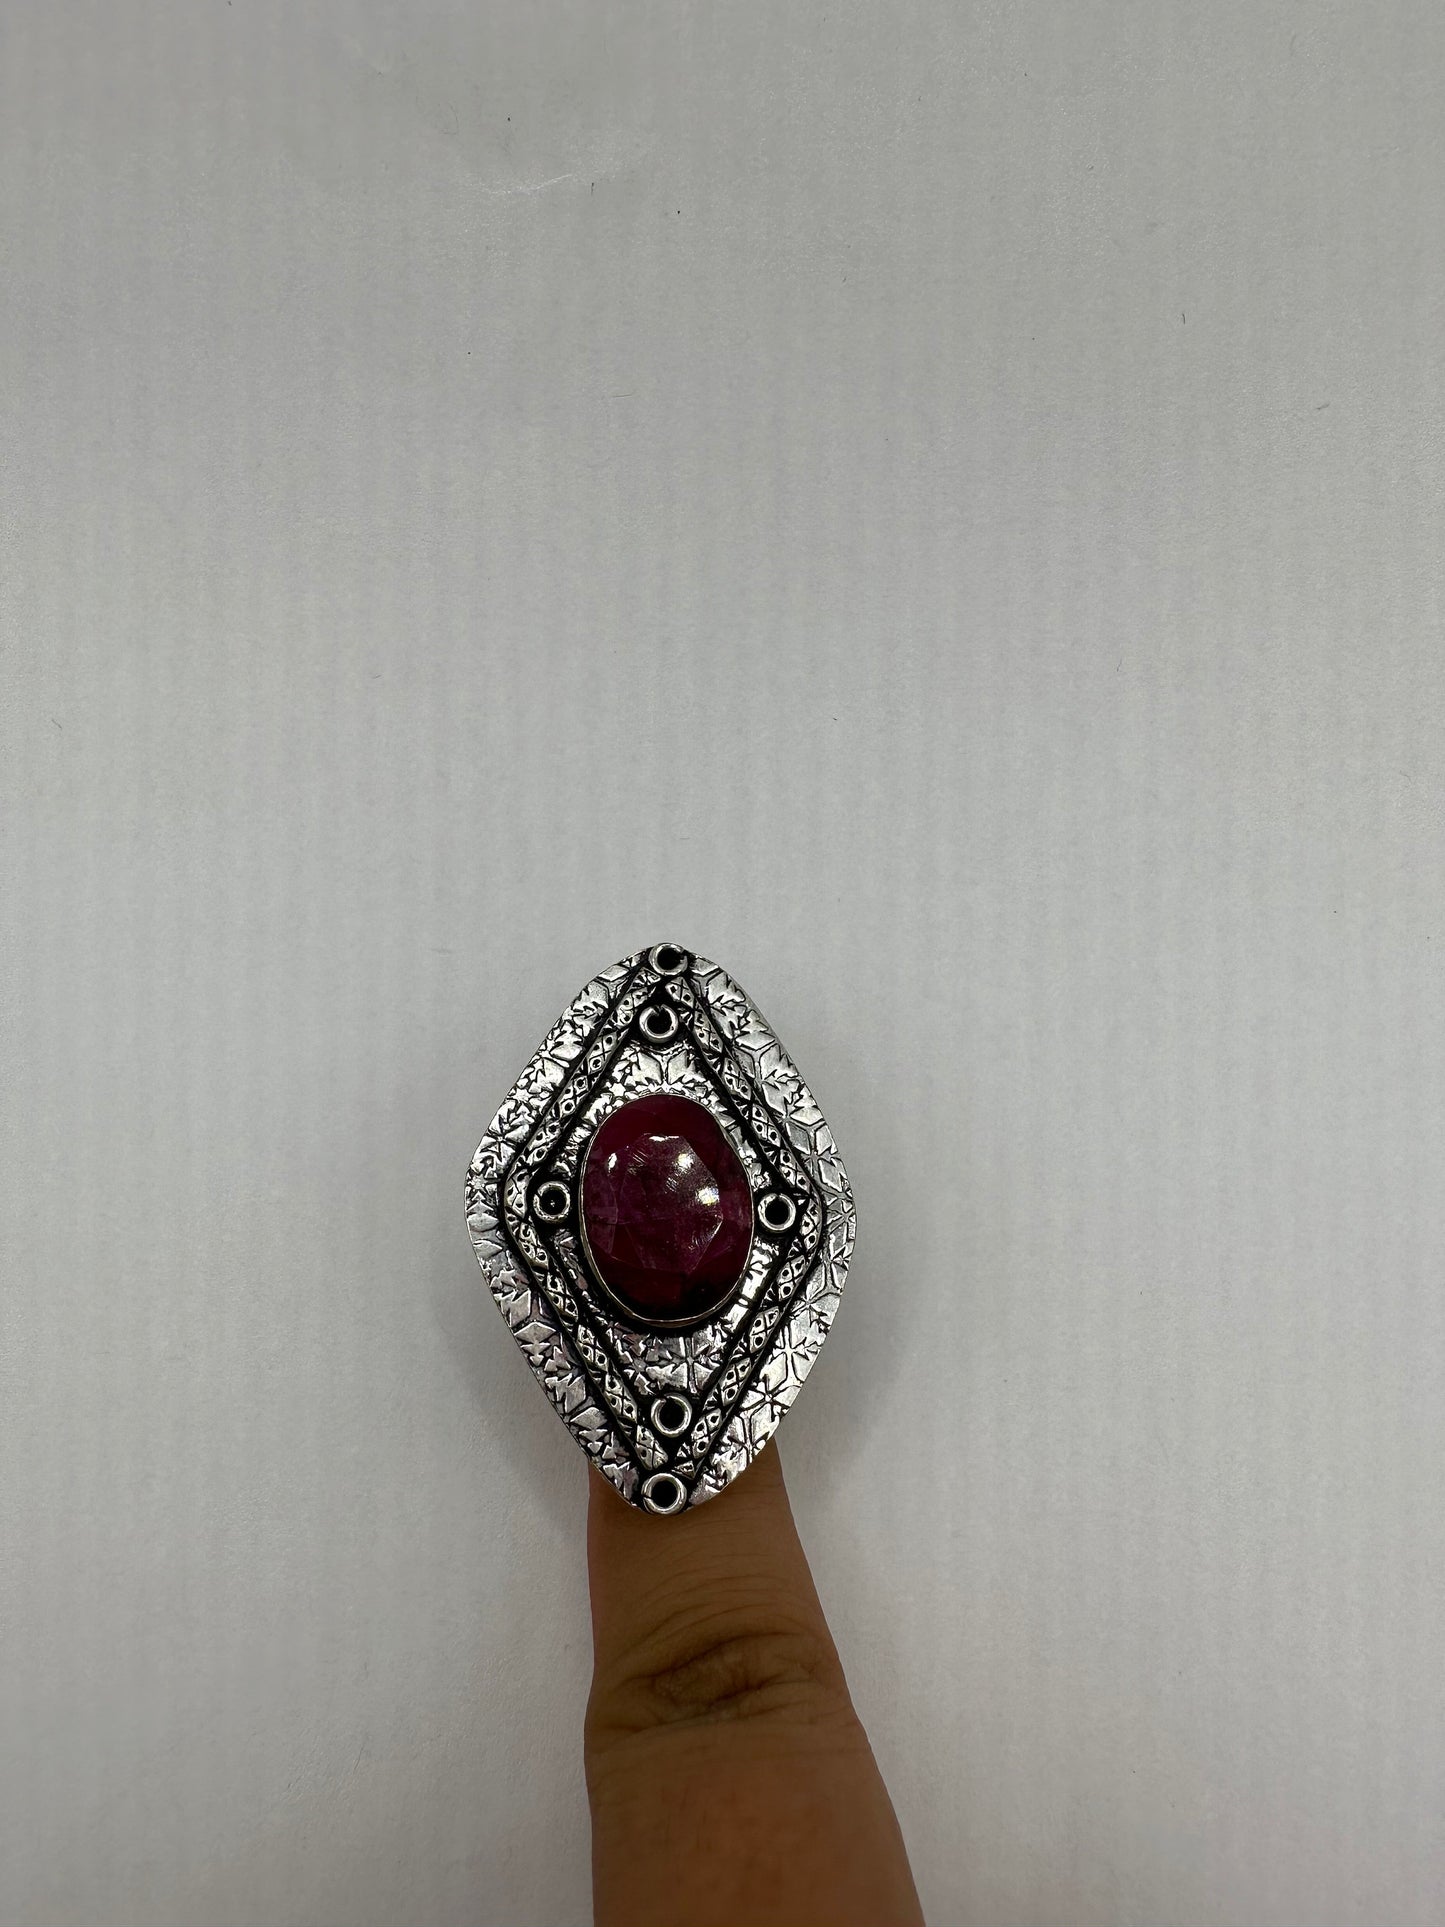 Vintage Handmade Raw Pink Ruby Silver Gothic Ring